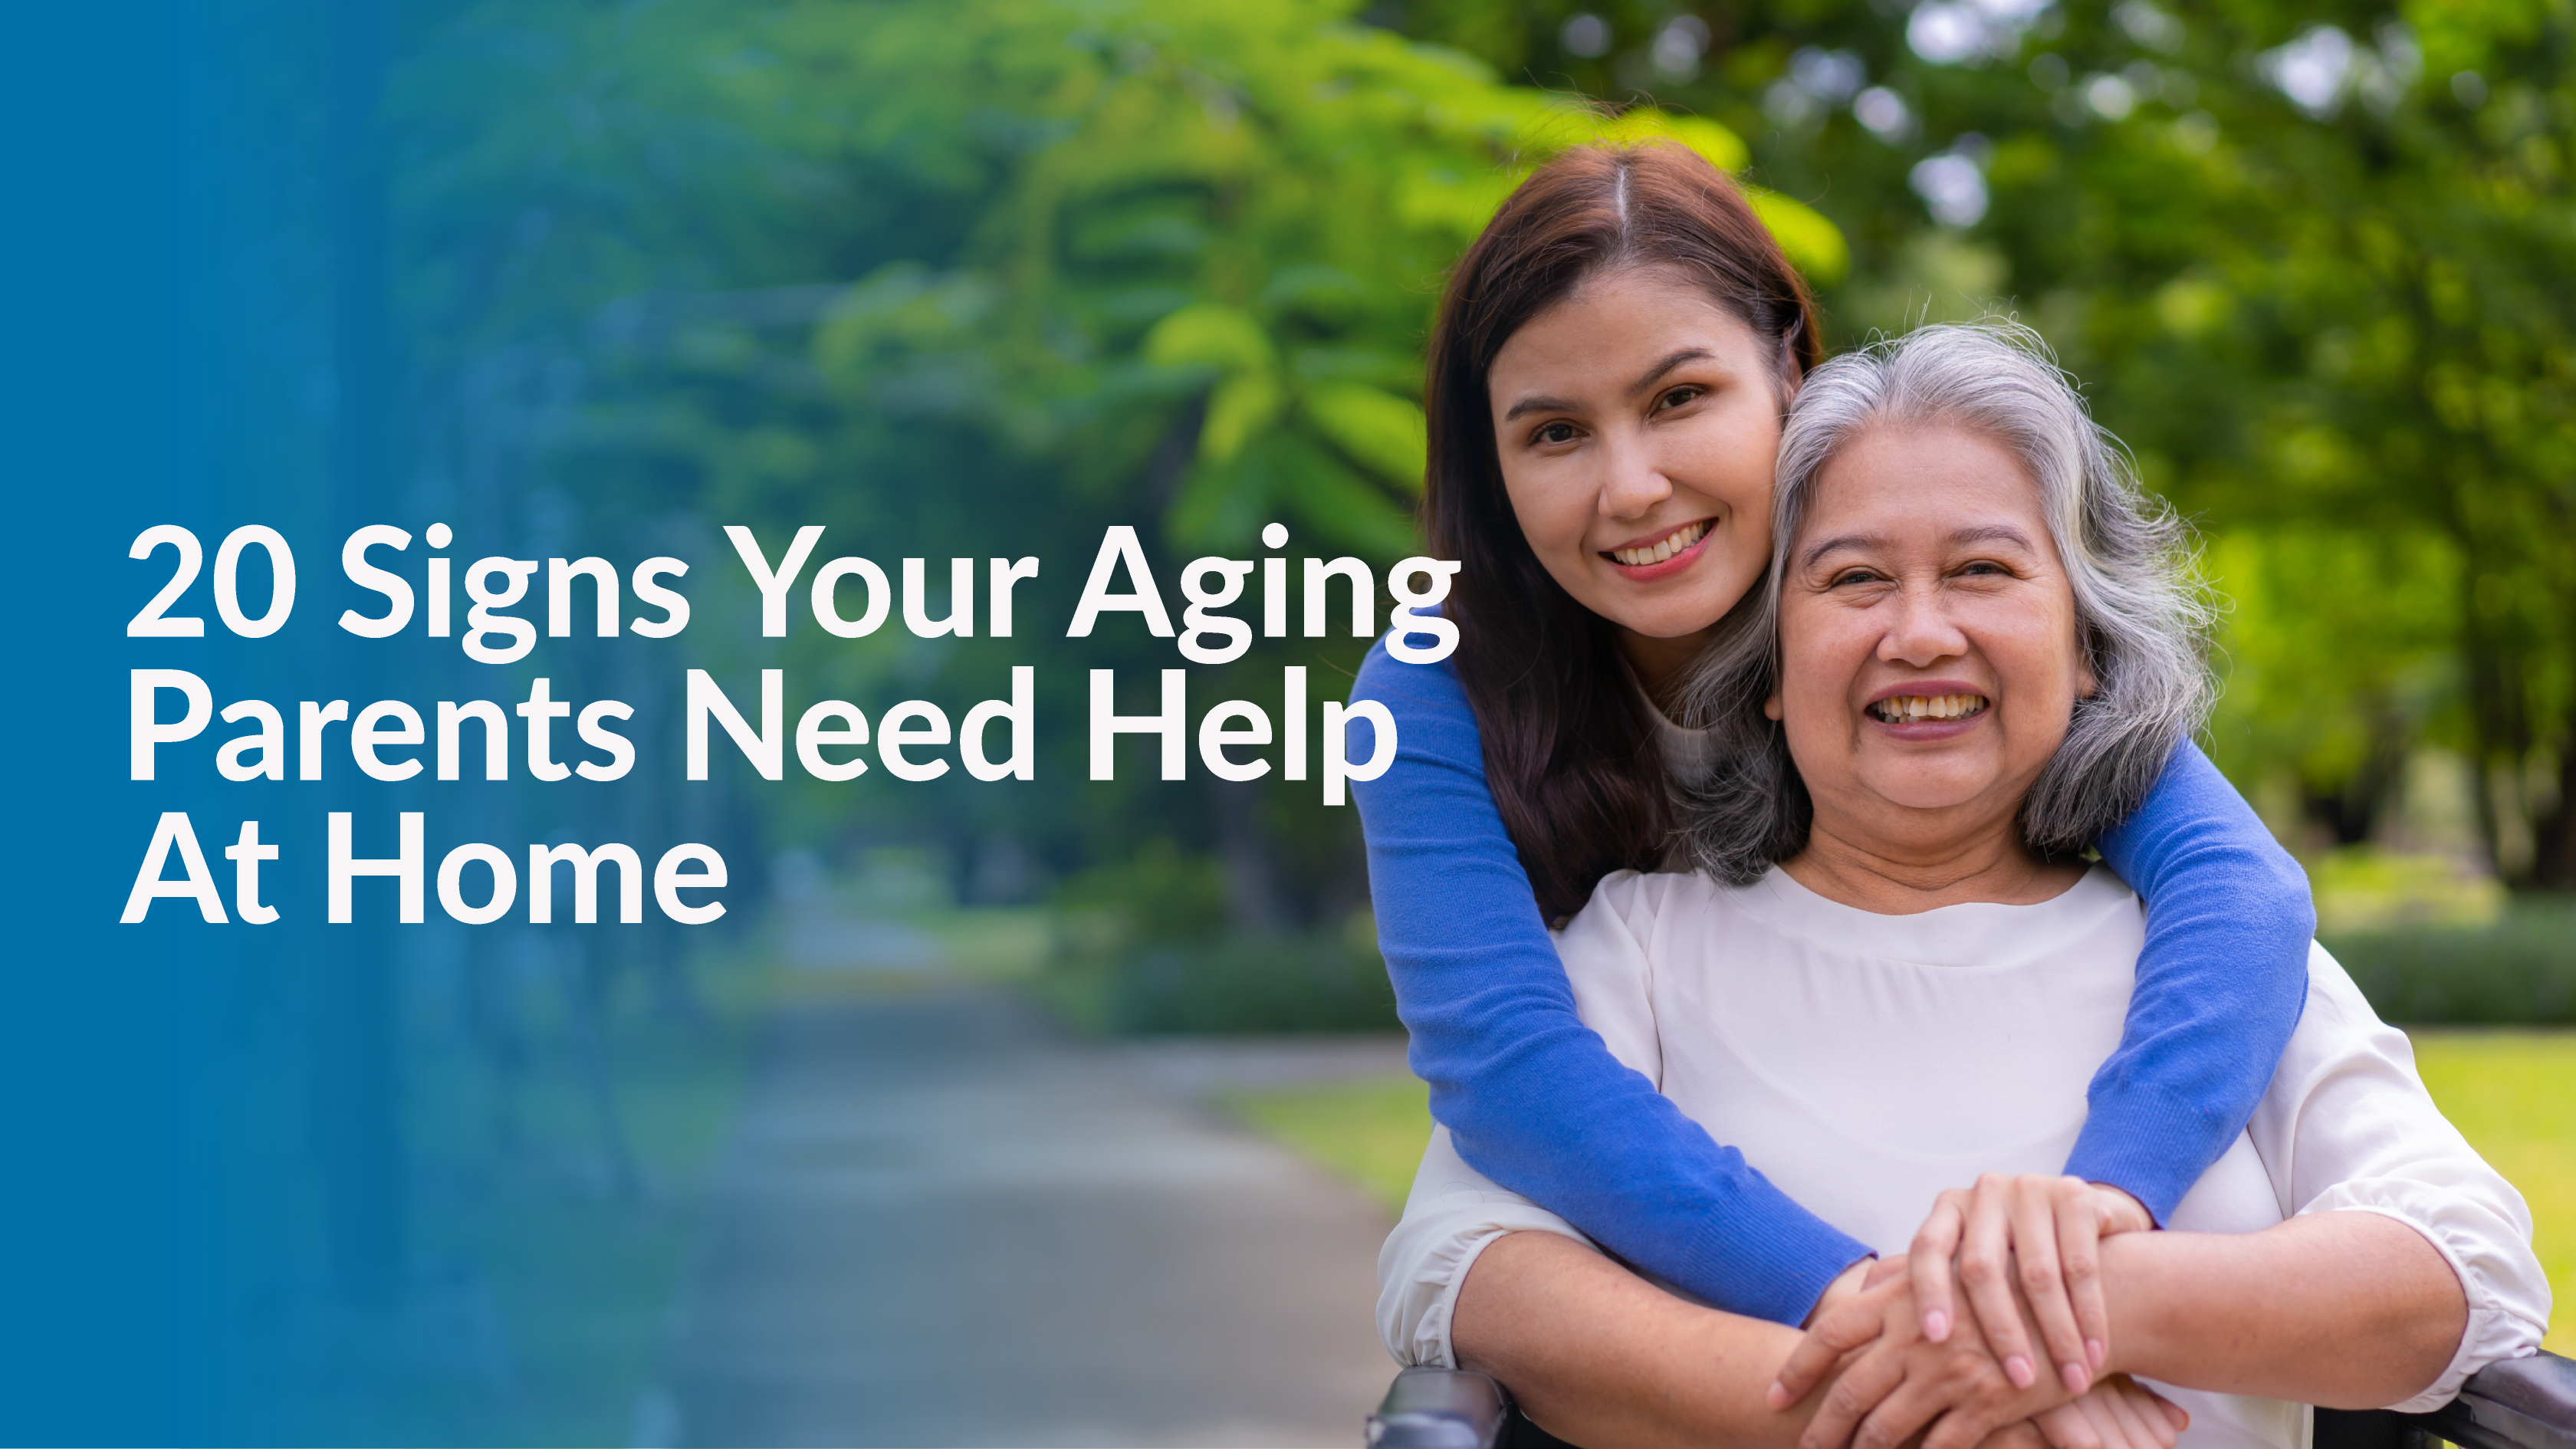 Signs Your Aging Parents Need Help At Home Featured Image